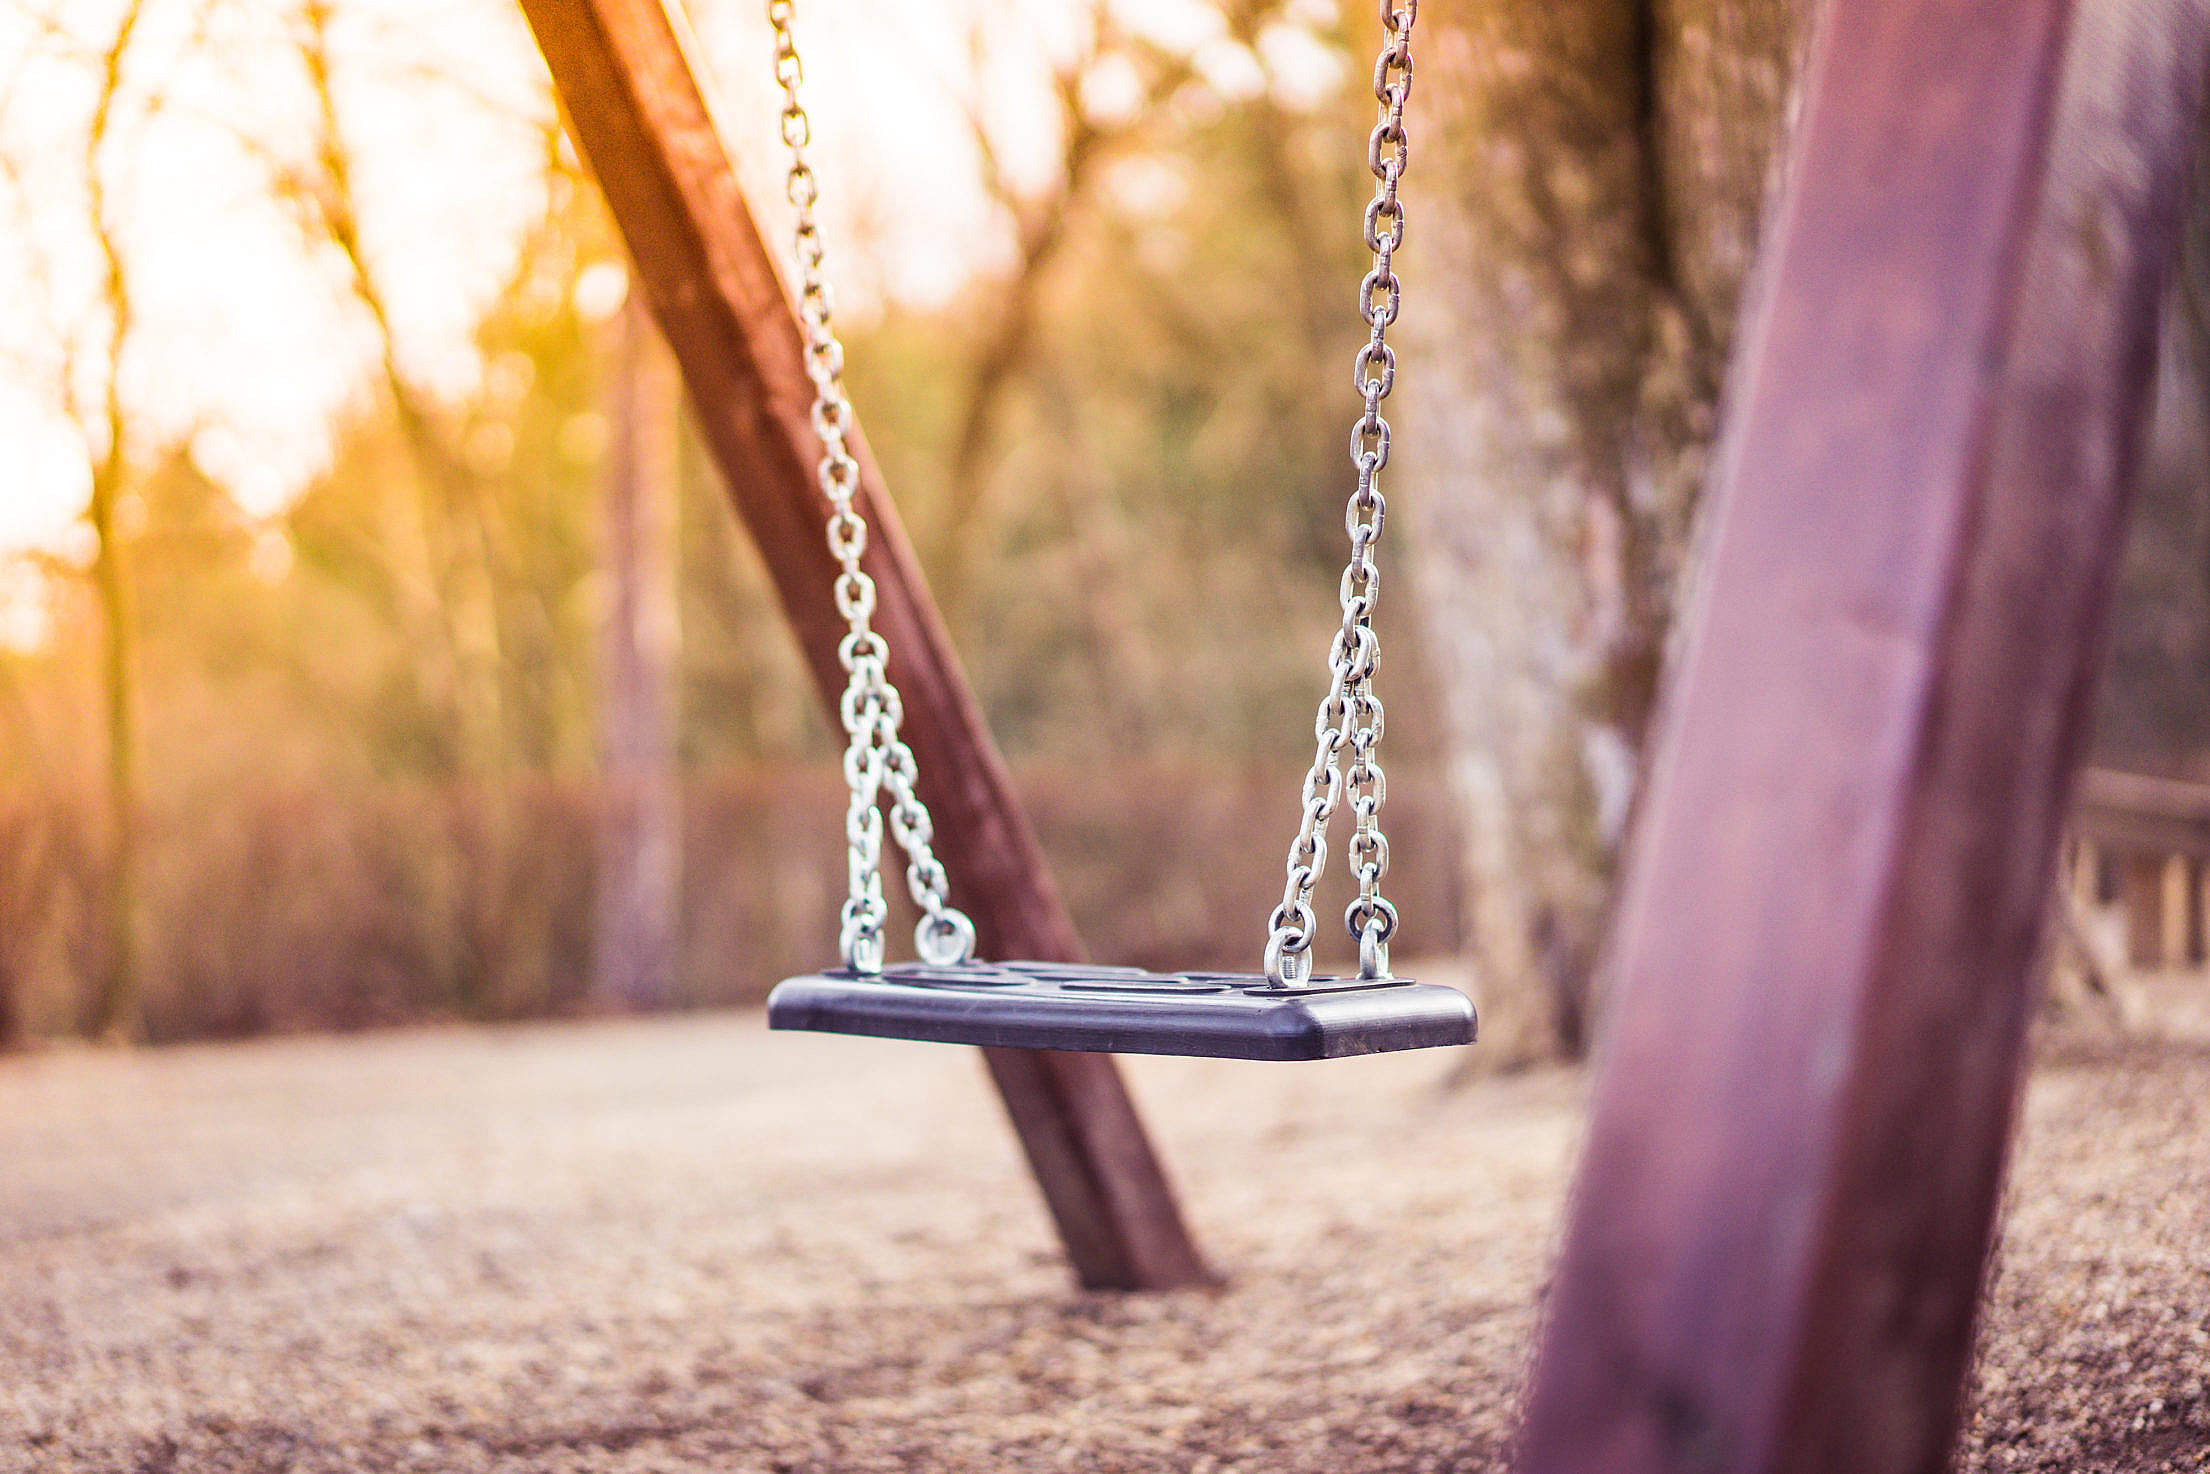 Swing For Kids in City Park Playground #2 Free Stock Photo